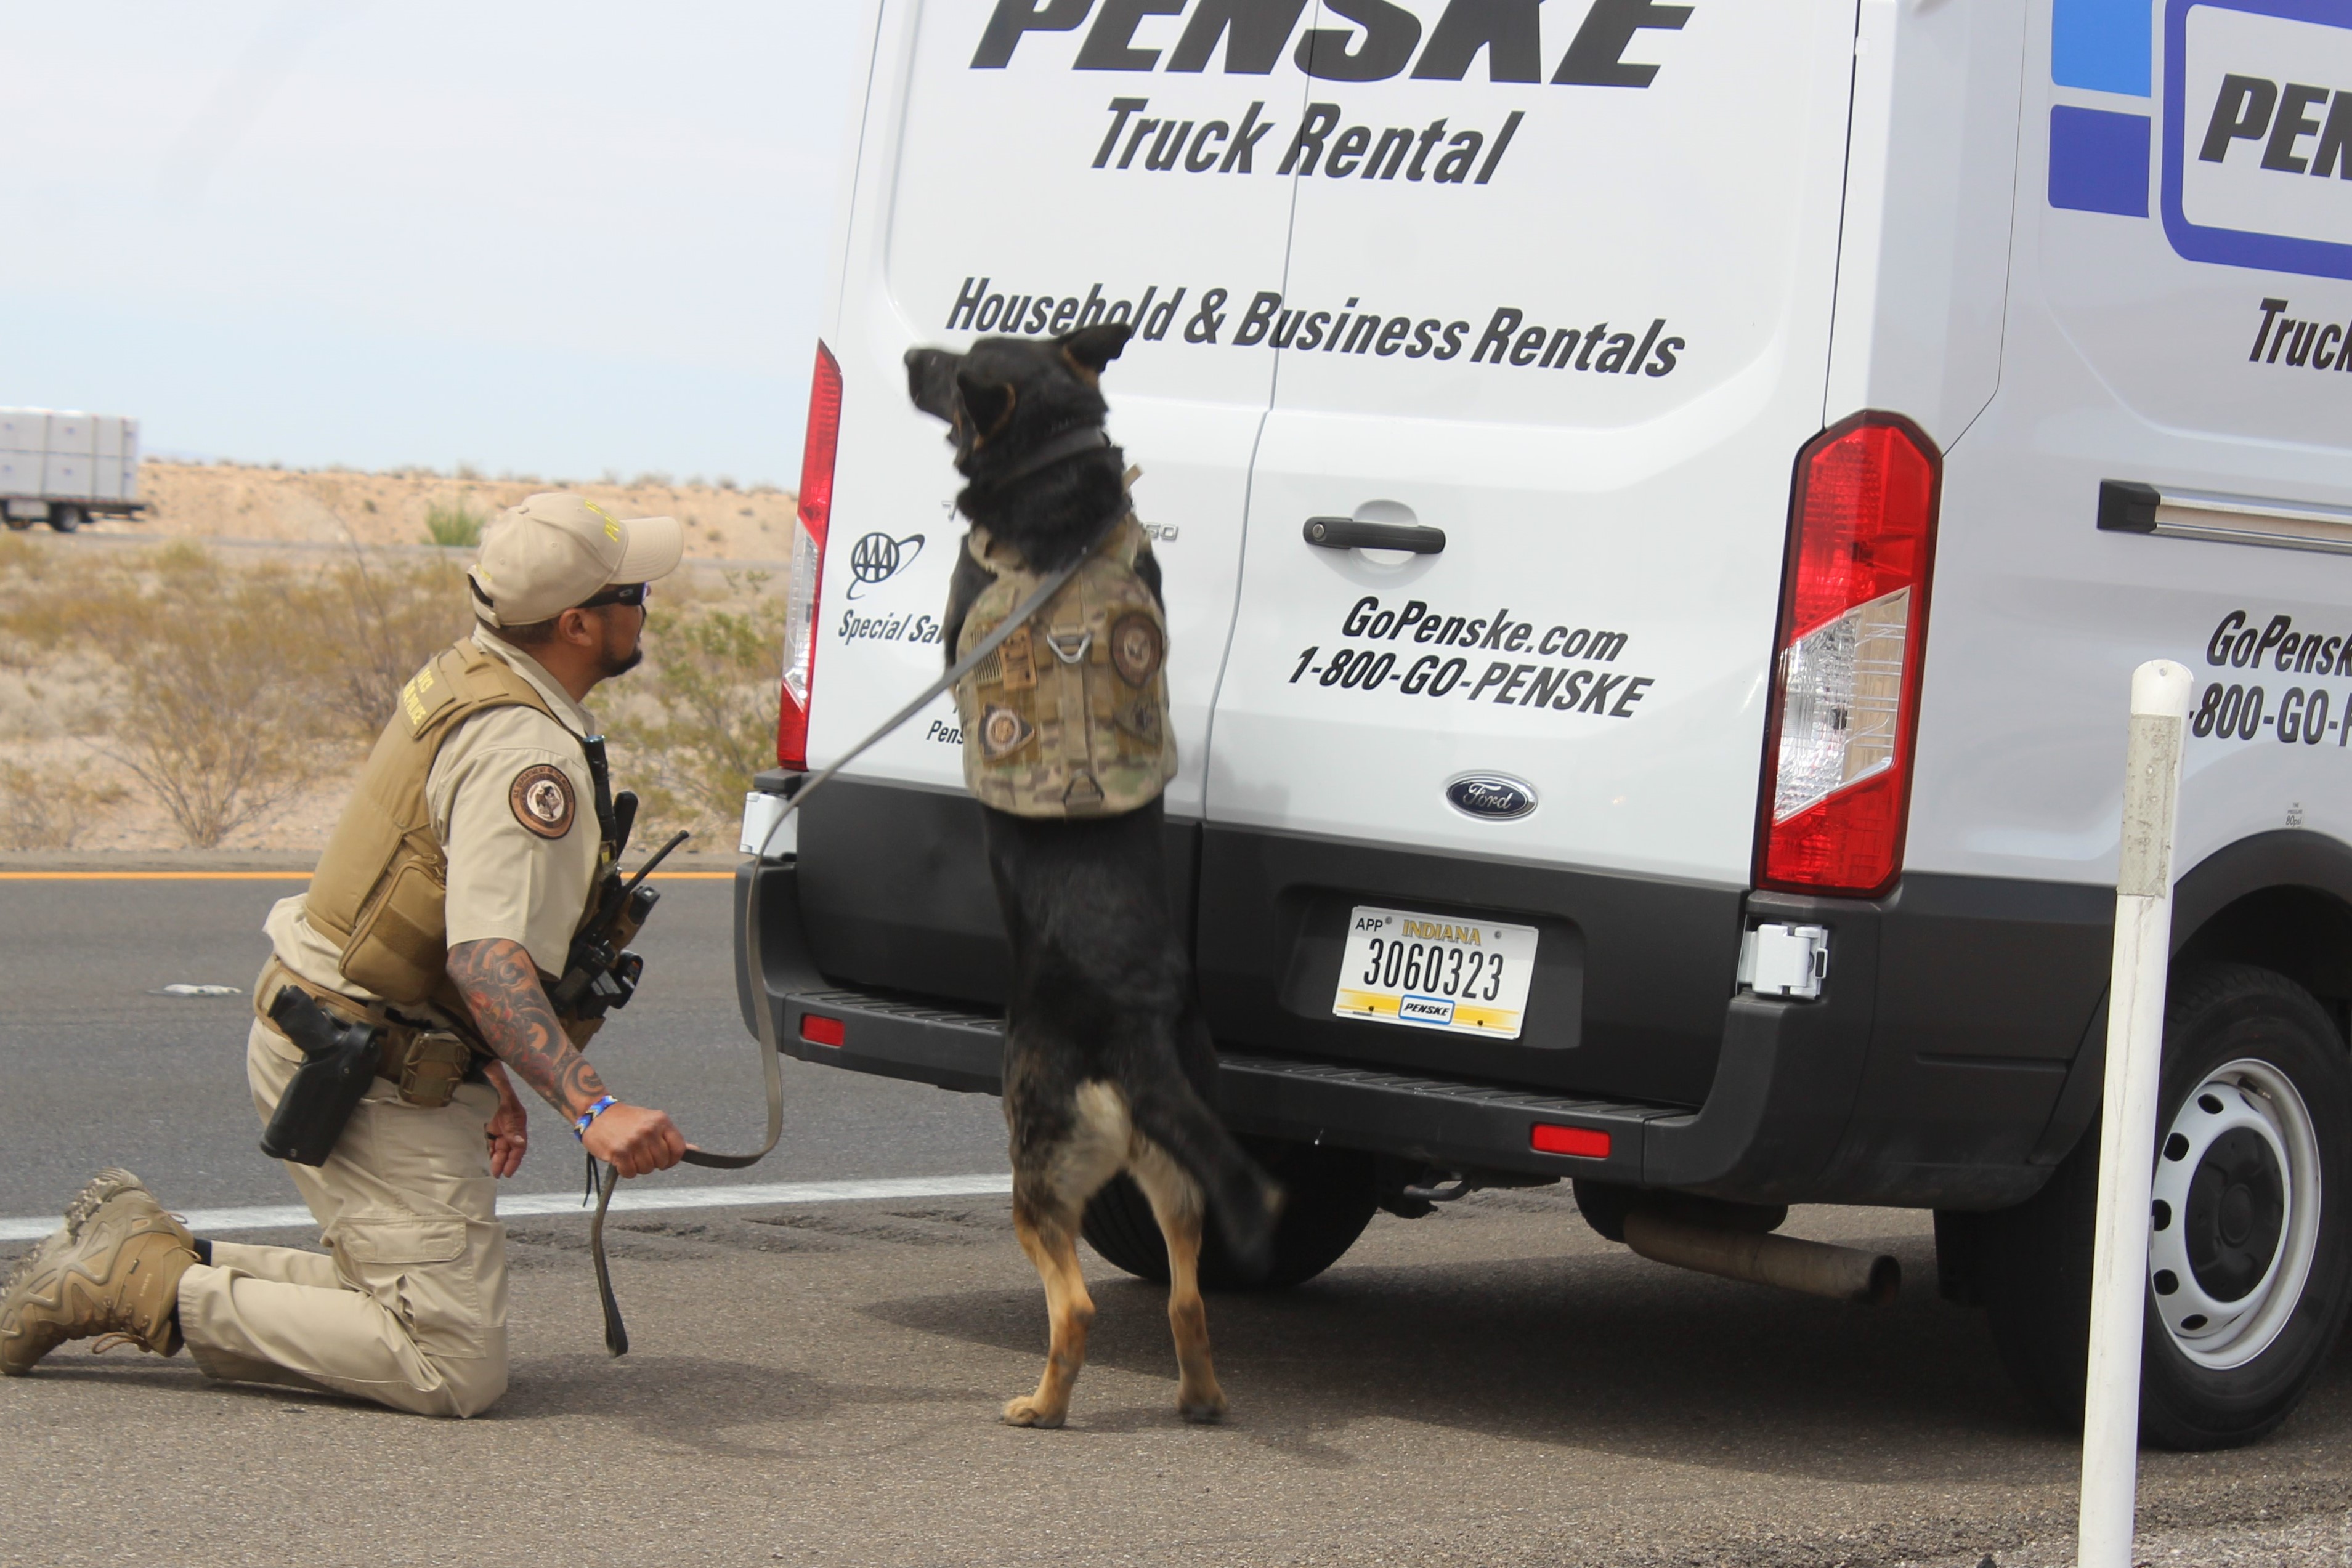 : “A Bureau of Indian Affairs K-9 officer and partner conduct an outside search of a rental truck on May 9, 2022, during a multi-agency criminal interdiction operation along I-15 within the Moapa River Indian Reservation in Nevada.”